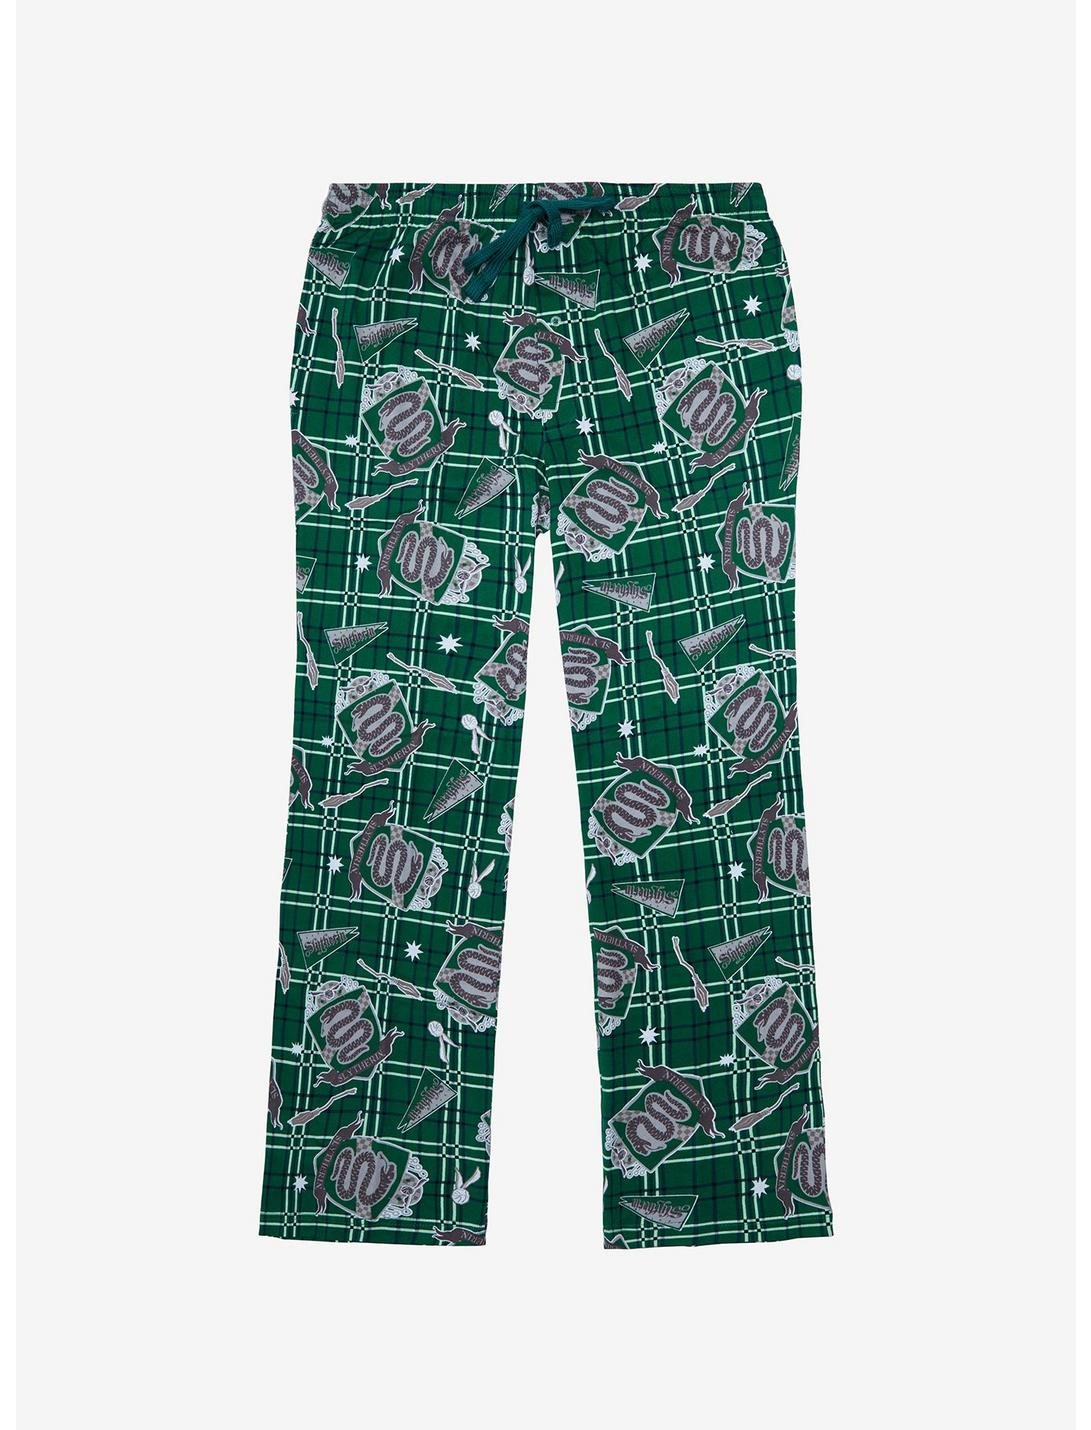 Harry Potter Slytherin Plaid Sleep Pants - BoxLunch Exclusive, MULTI, hi-res